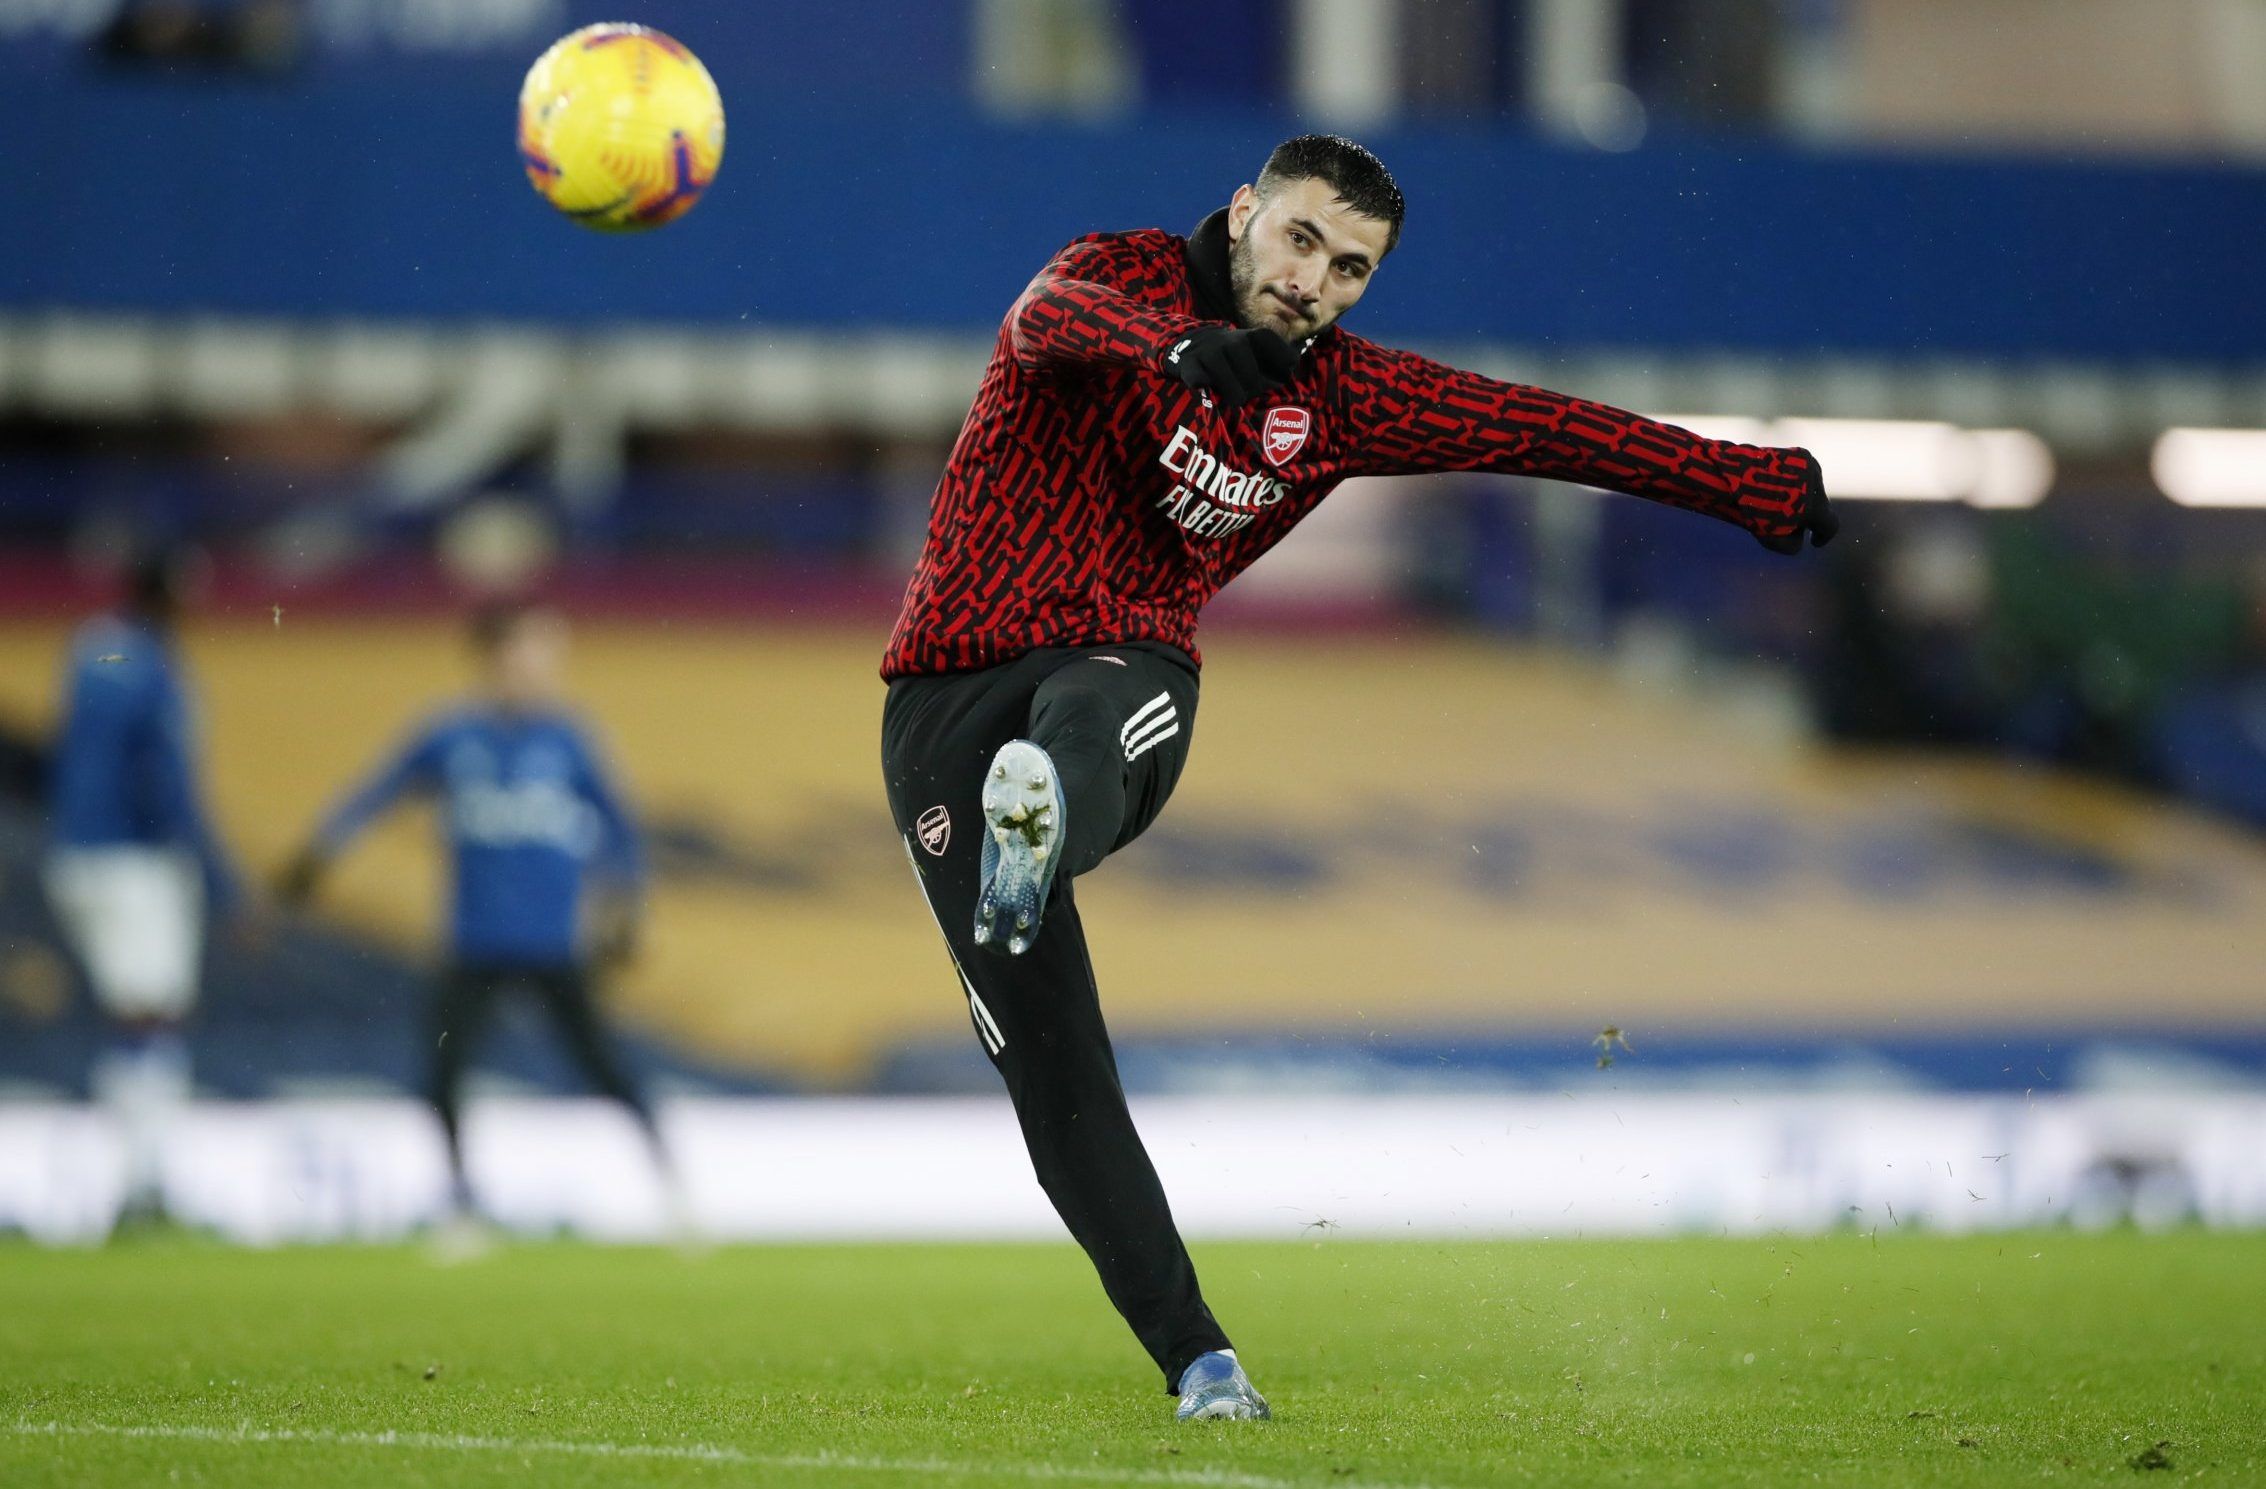 Arsenal defender Sead Kolasinac shoots during warm-up before Premier League clash with Everton at Goodison Park